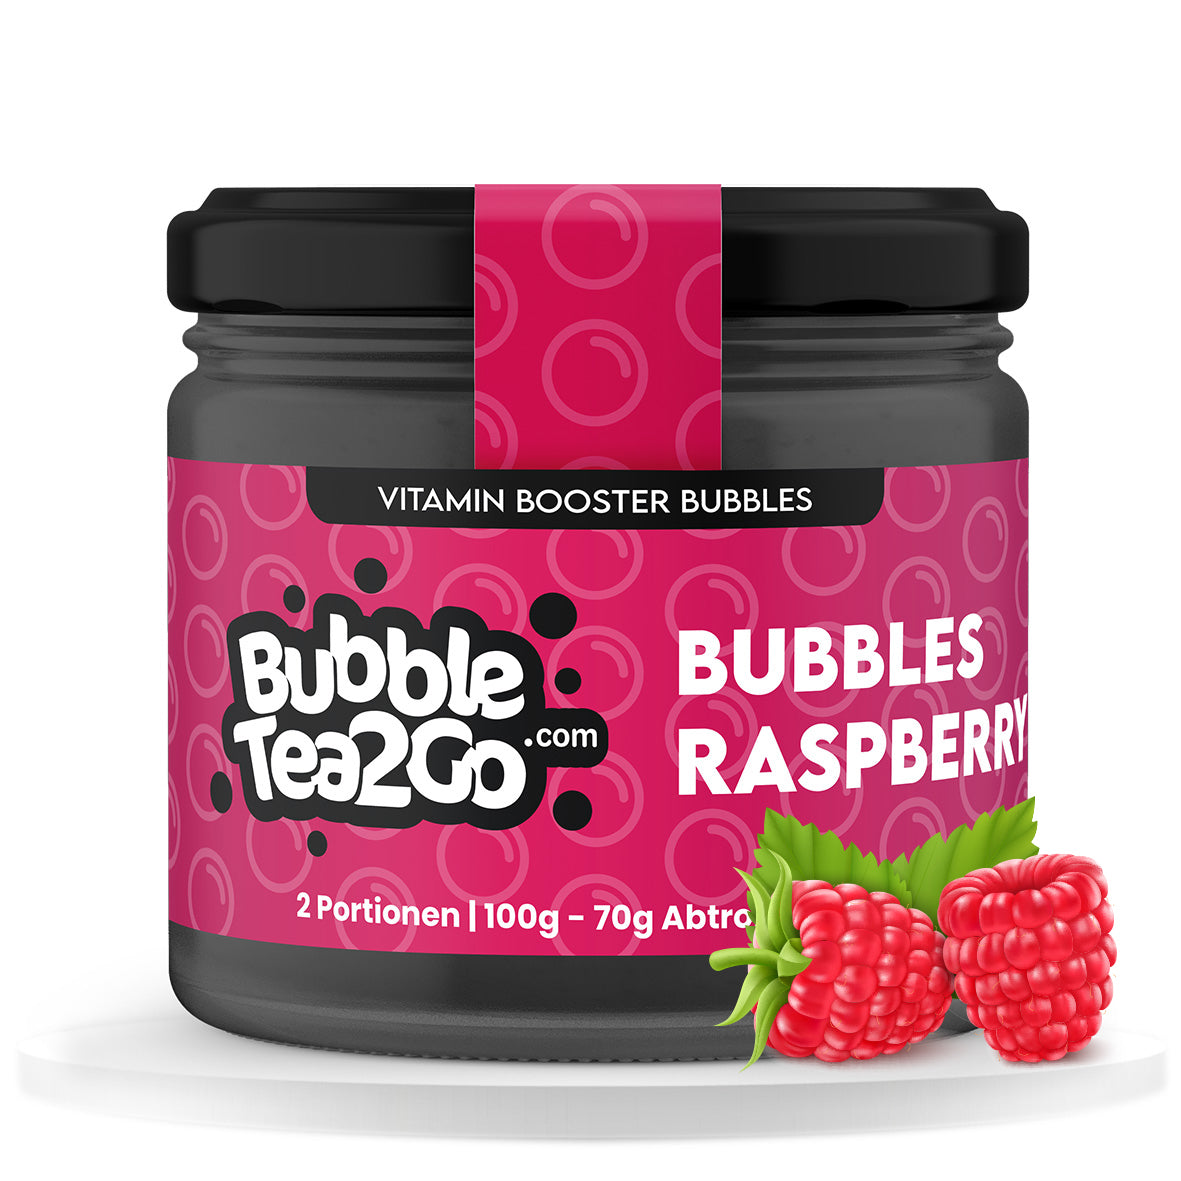 Bubbles - Framboos 2 porties (120g)